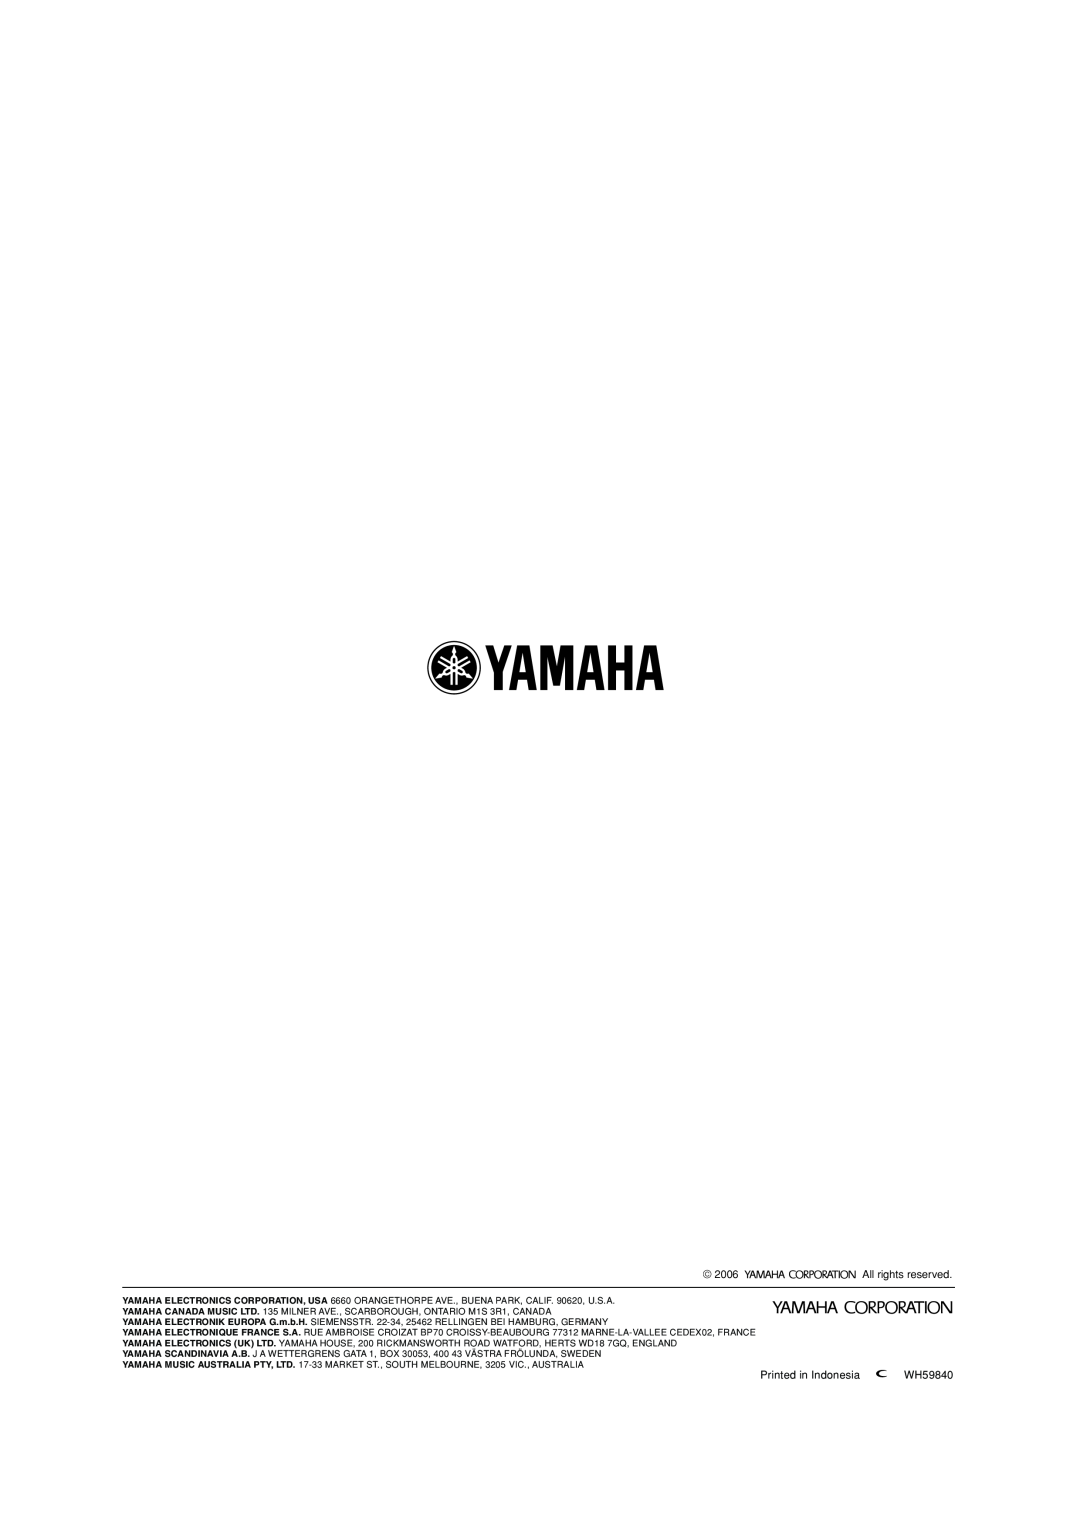 Yamaha Soavo-1 owner manual All rights reserved, WH59840 